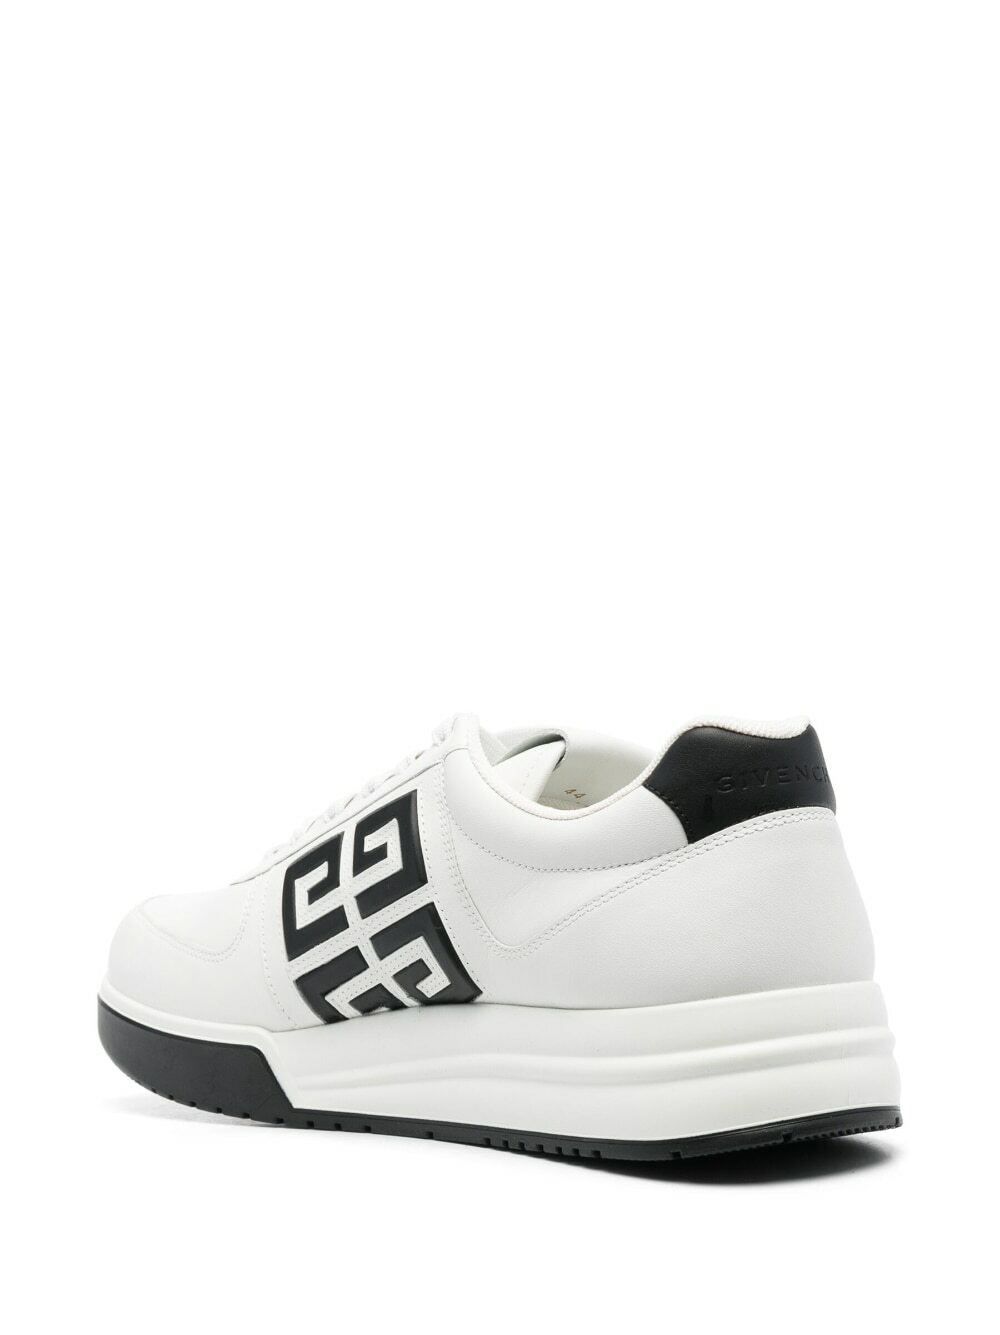 GIVENCHY - G4 Leather Sneakers Givenchy